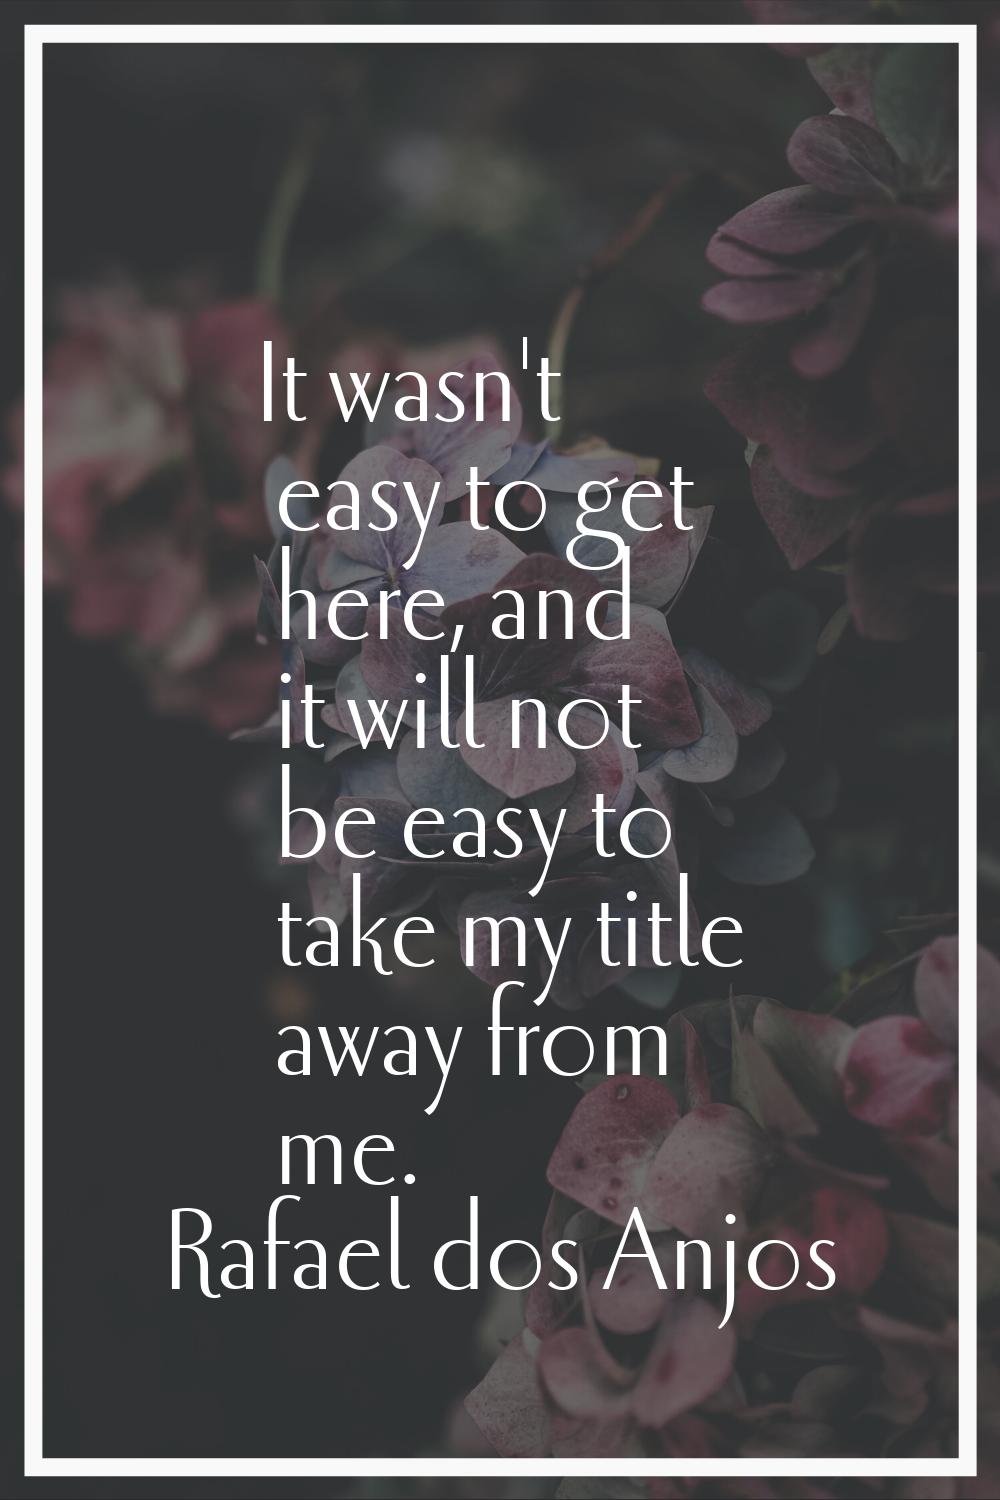 It wasn't easy to get here, and it will not be easy to take my title away from me.